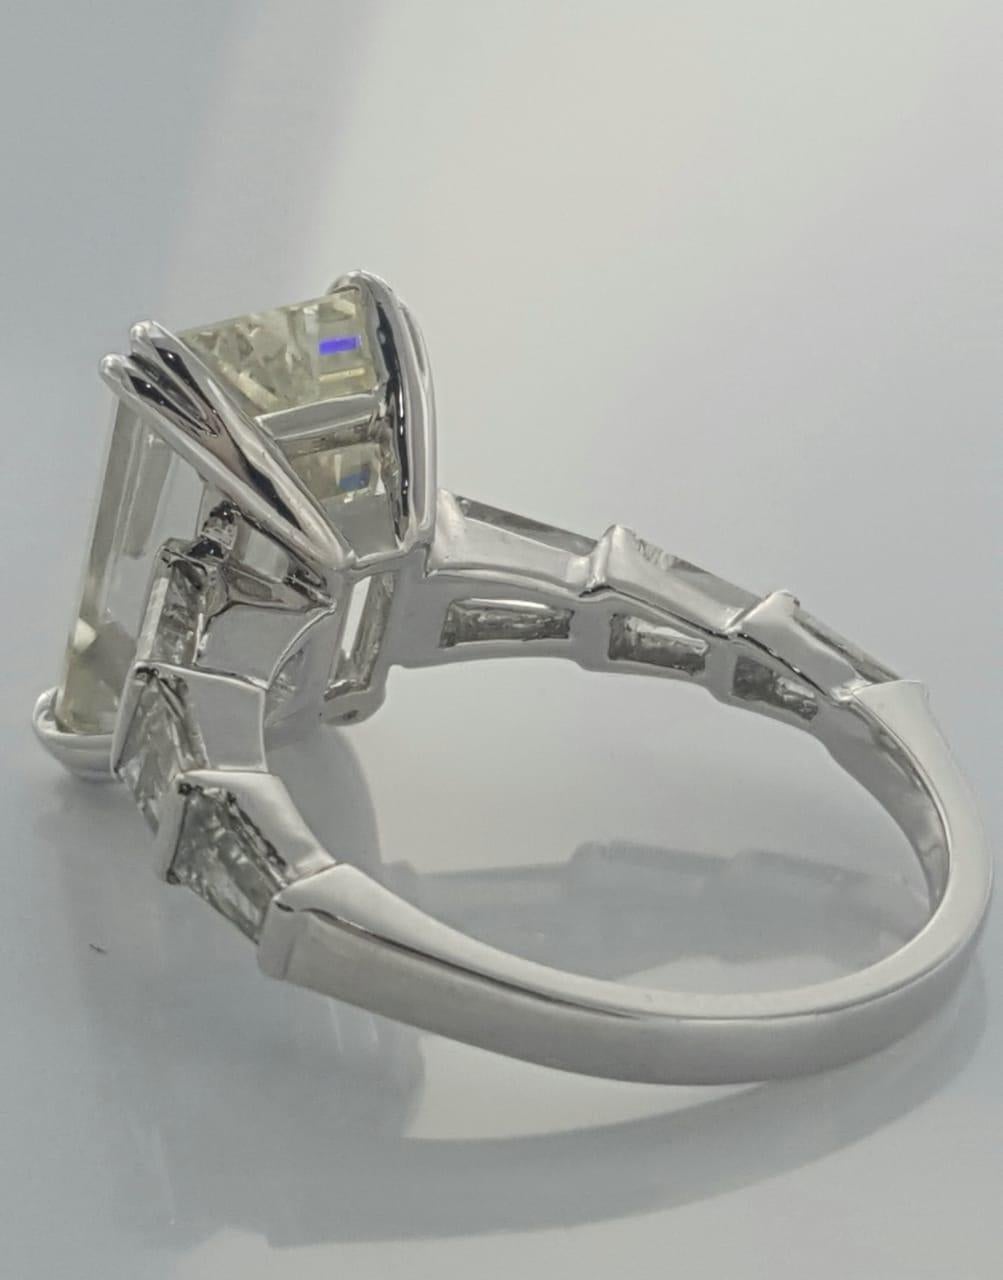 3 carat emerald cut diamond ring with baguettes